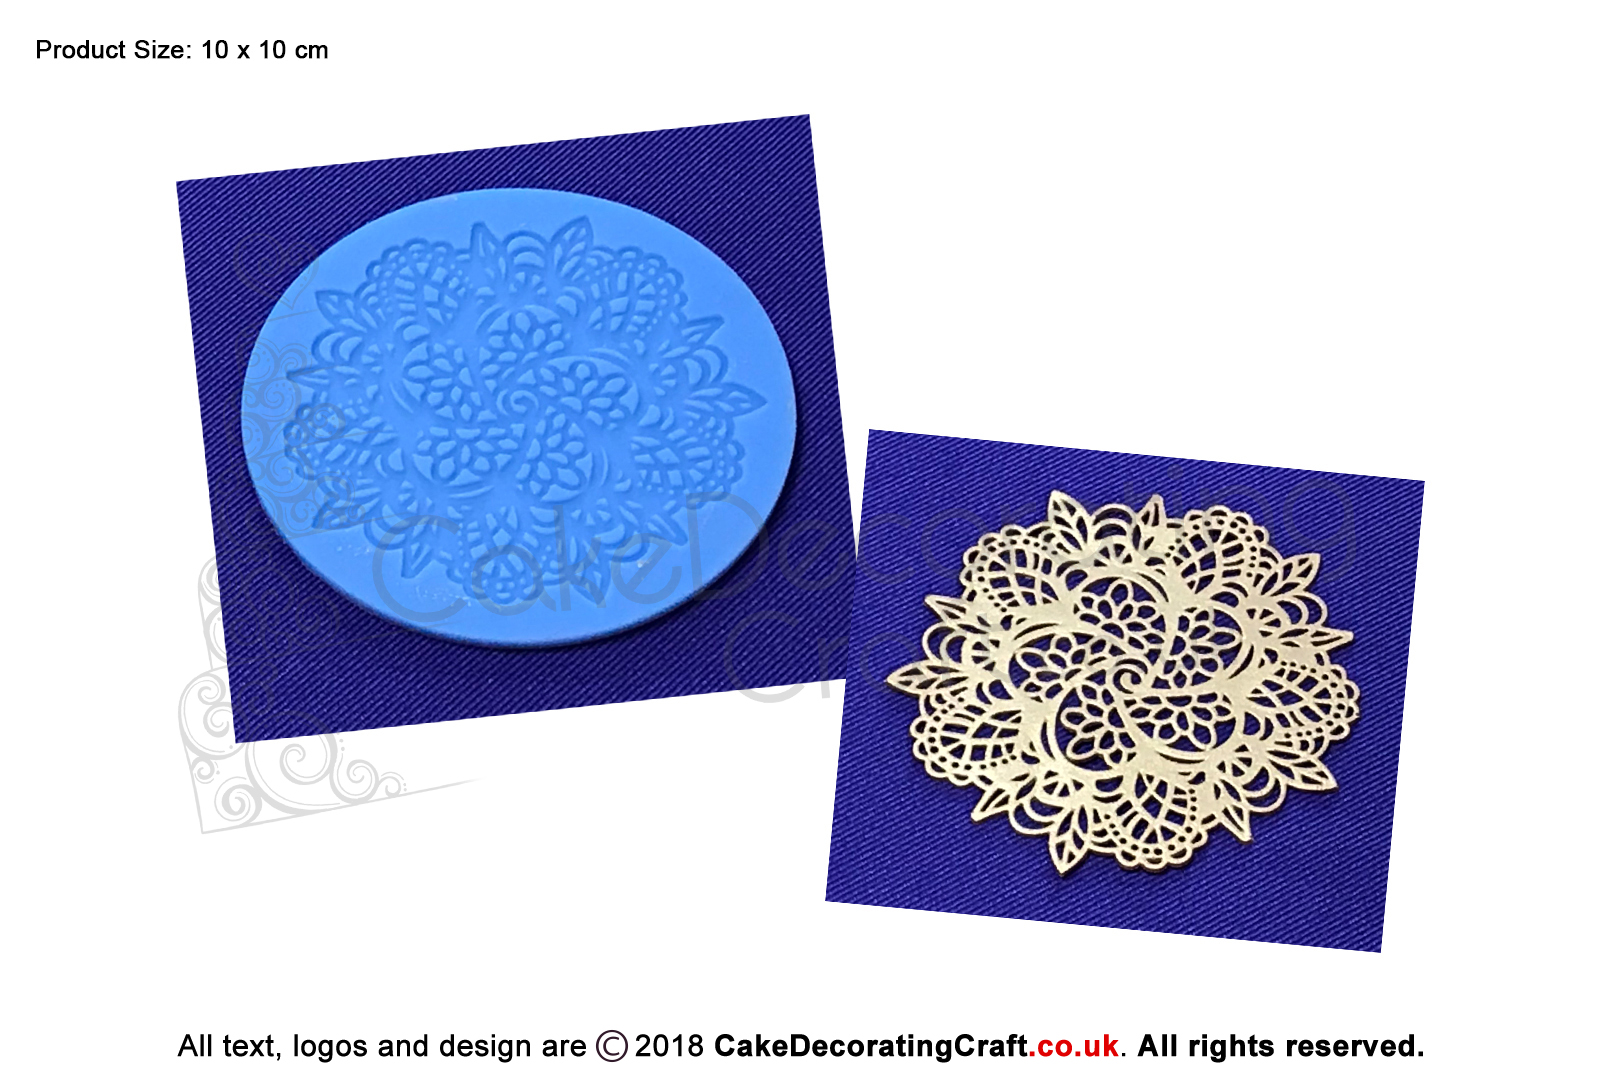 Swirl Doily | Cake Lace Mats for Edible Cake Lace Mixes and Premixes | Cake Decorating Craft Tool